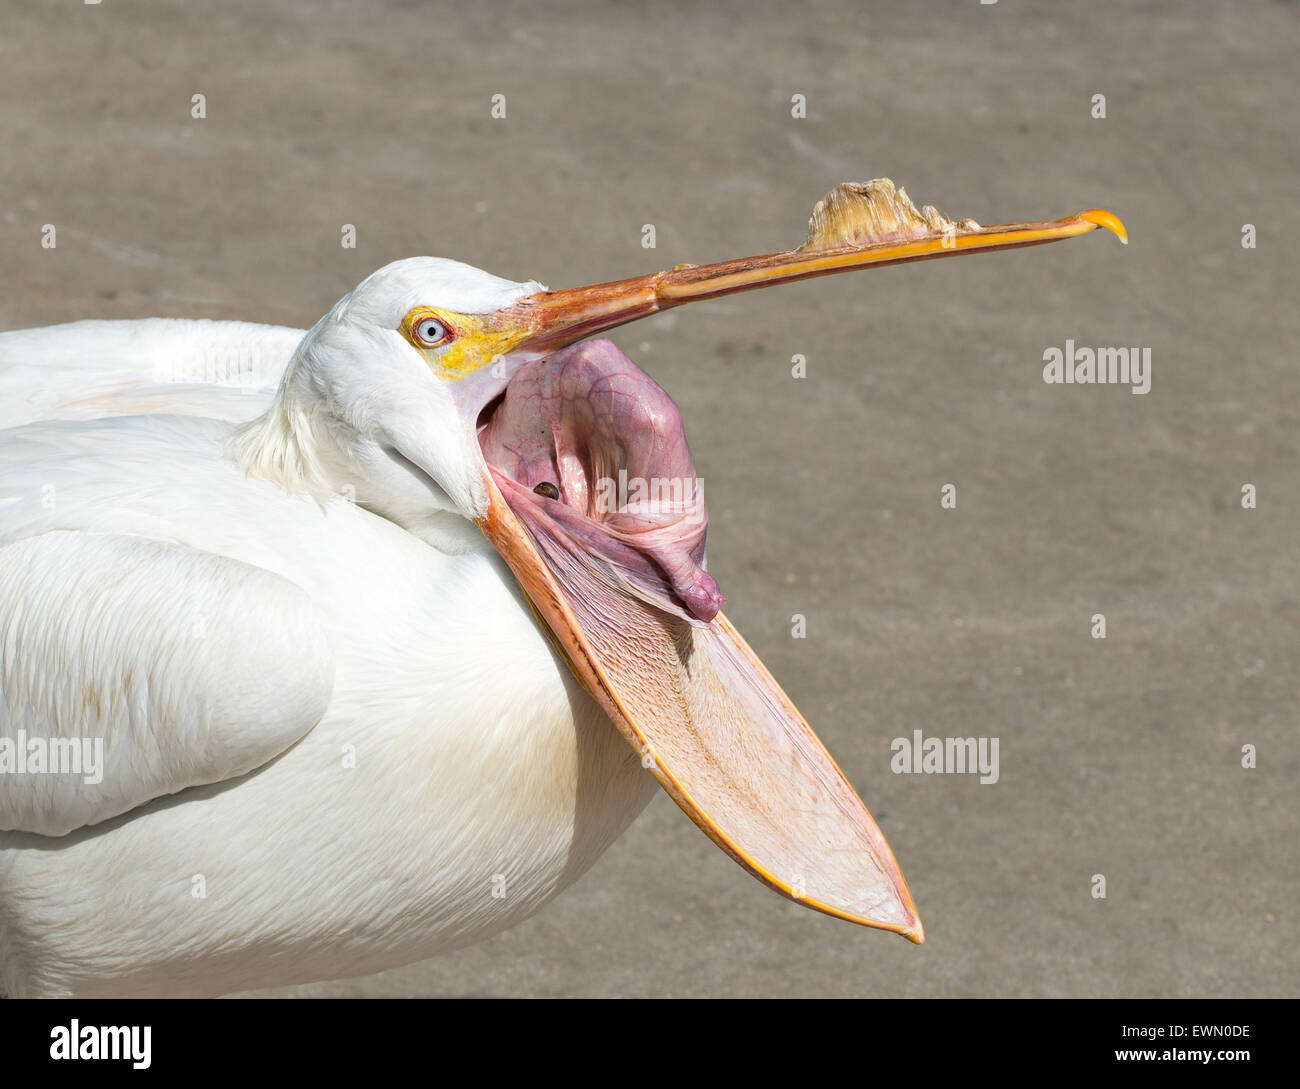 American white pelican with open beak showing the inside of its pouch Stock Photo